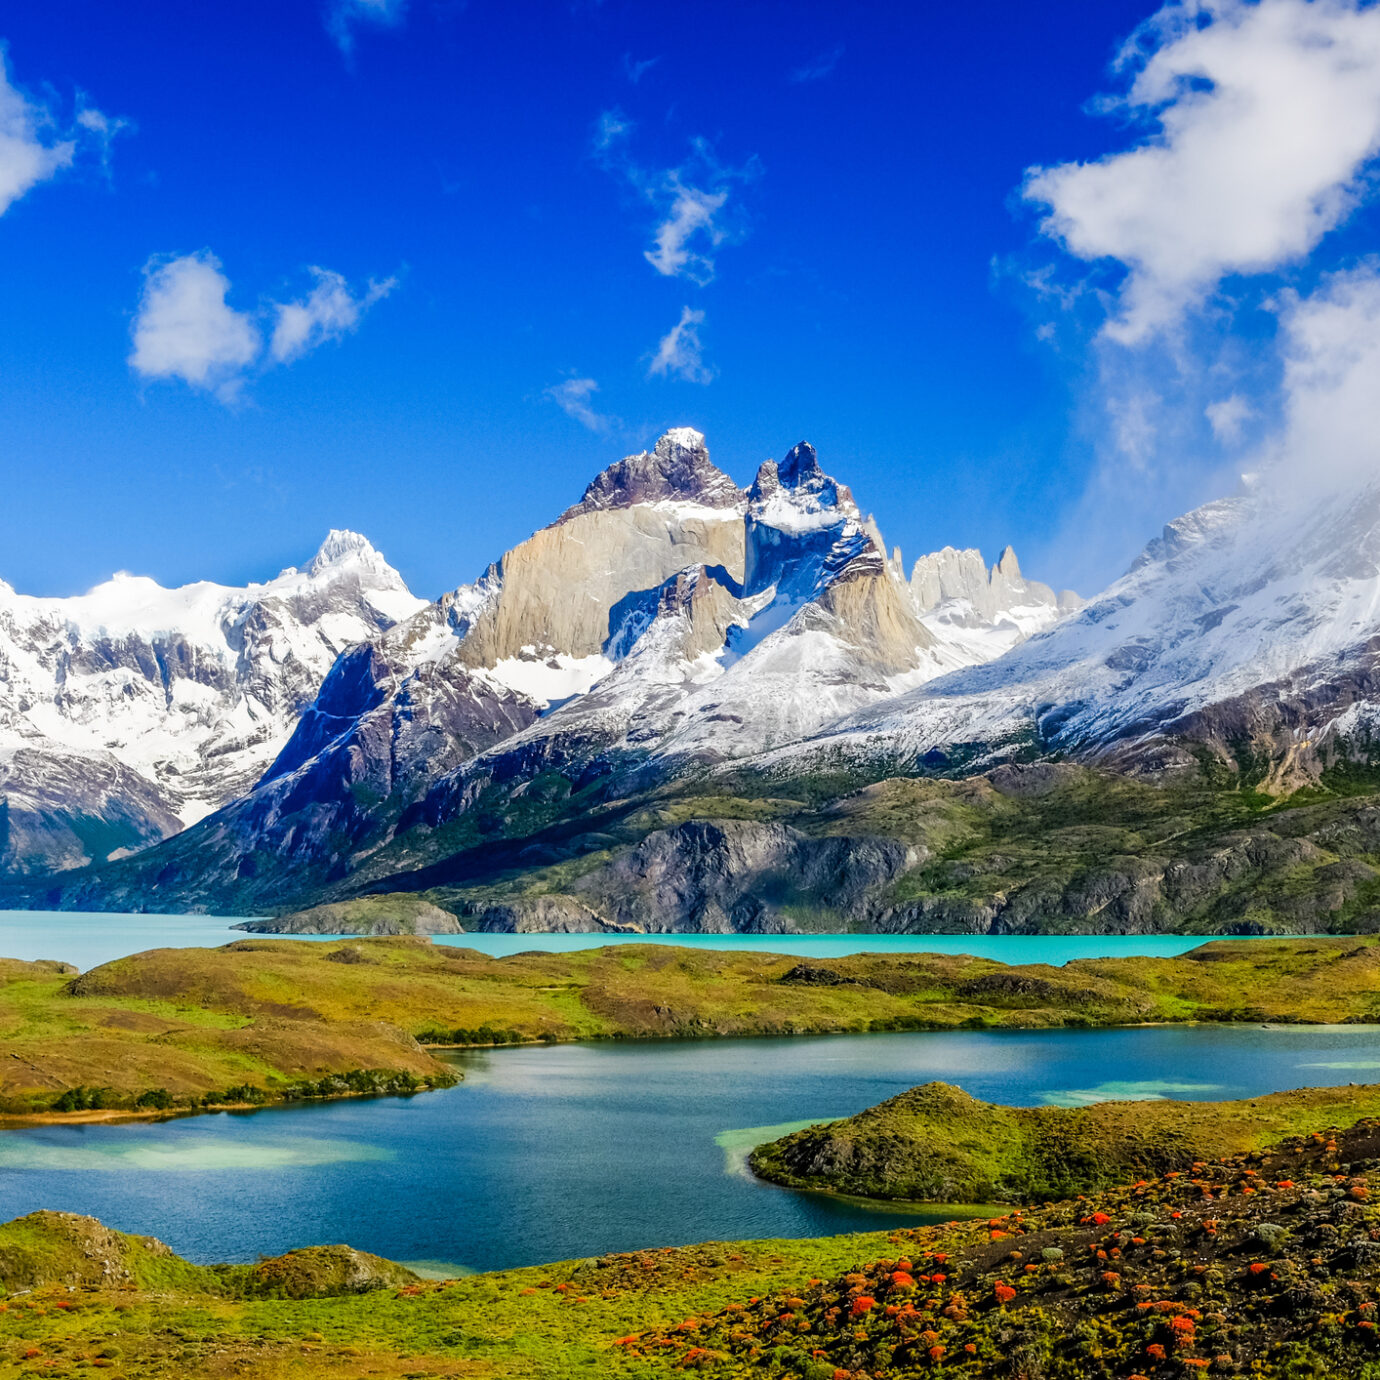 Beautiful Patagonia landscape of Andes mountain range, winding road and lake at Torres del Paine National Park, Chile.